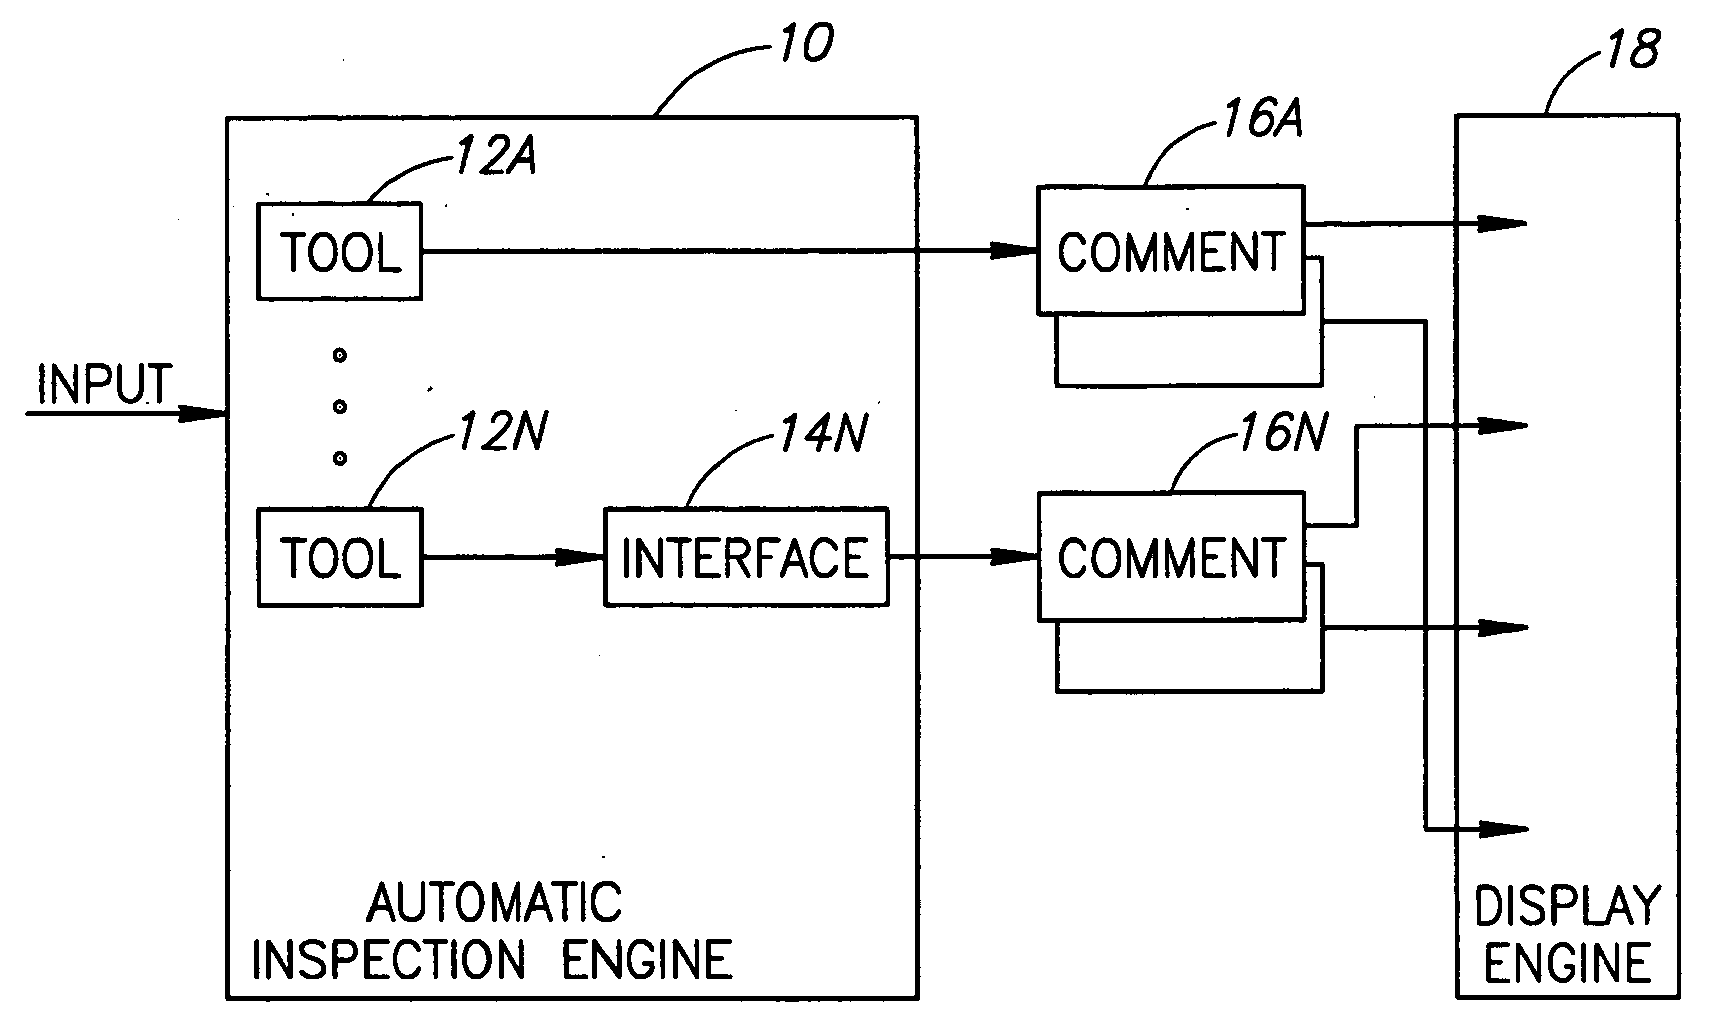 Automatic inspection tool